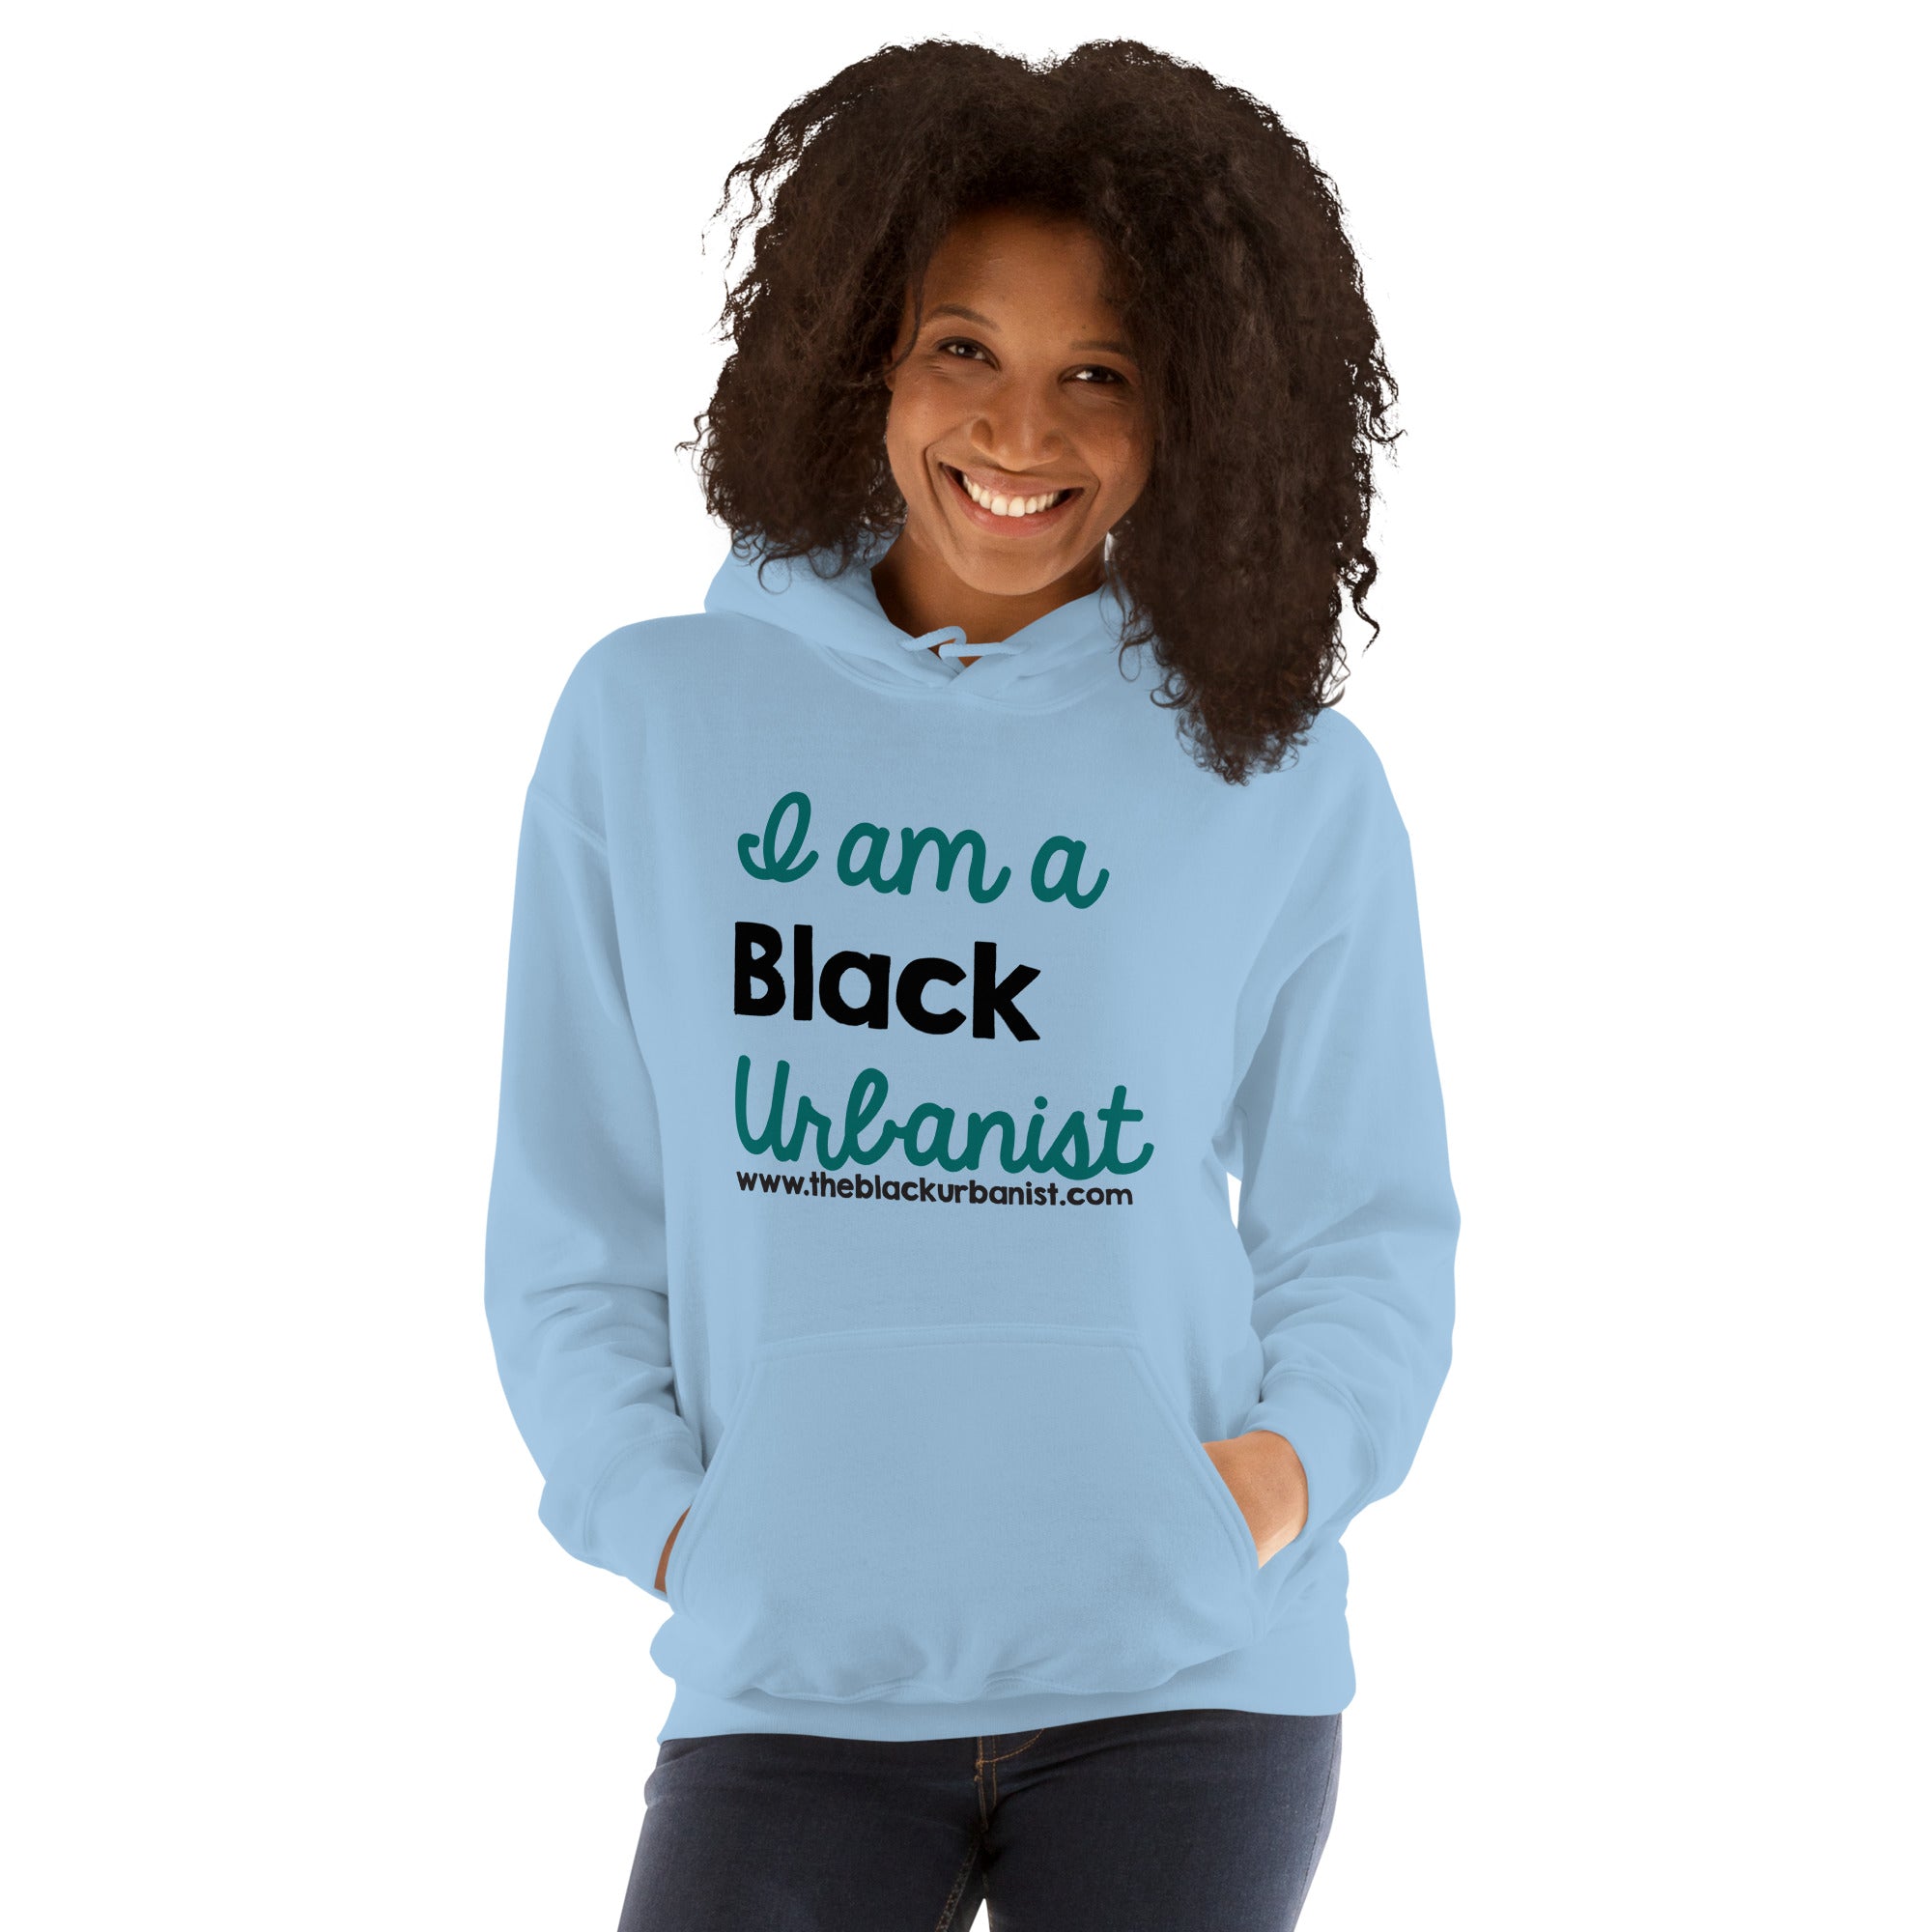 Black woman with loose curly hair in a light blue hoodie with the words I am a Black Urbanist printed on it